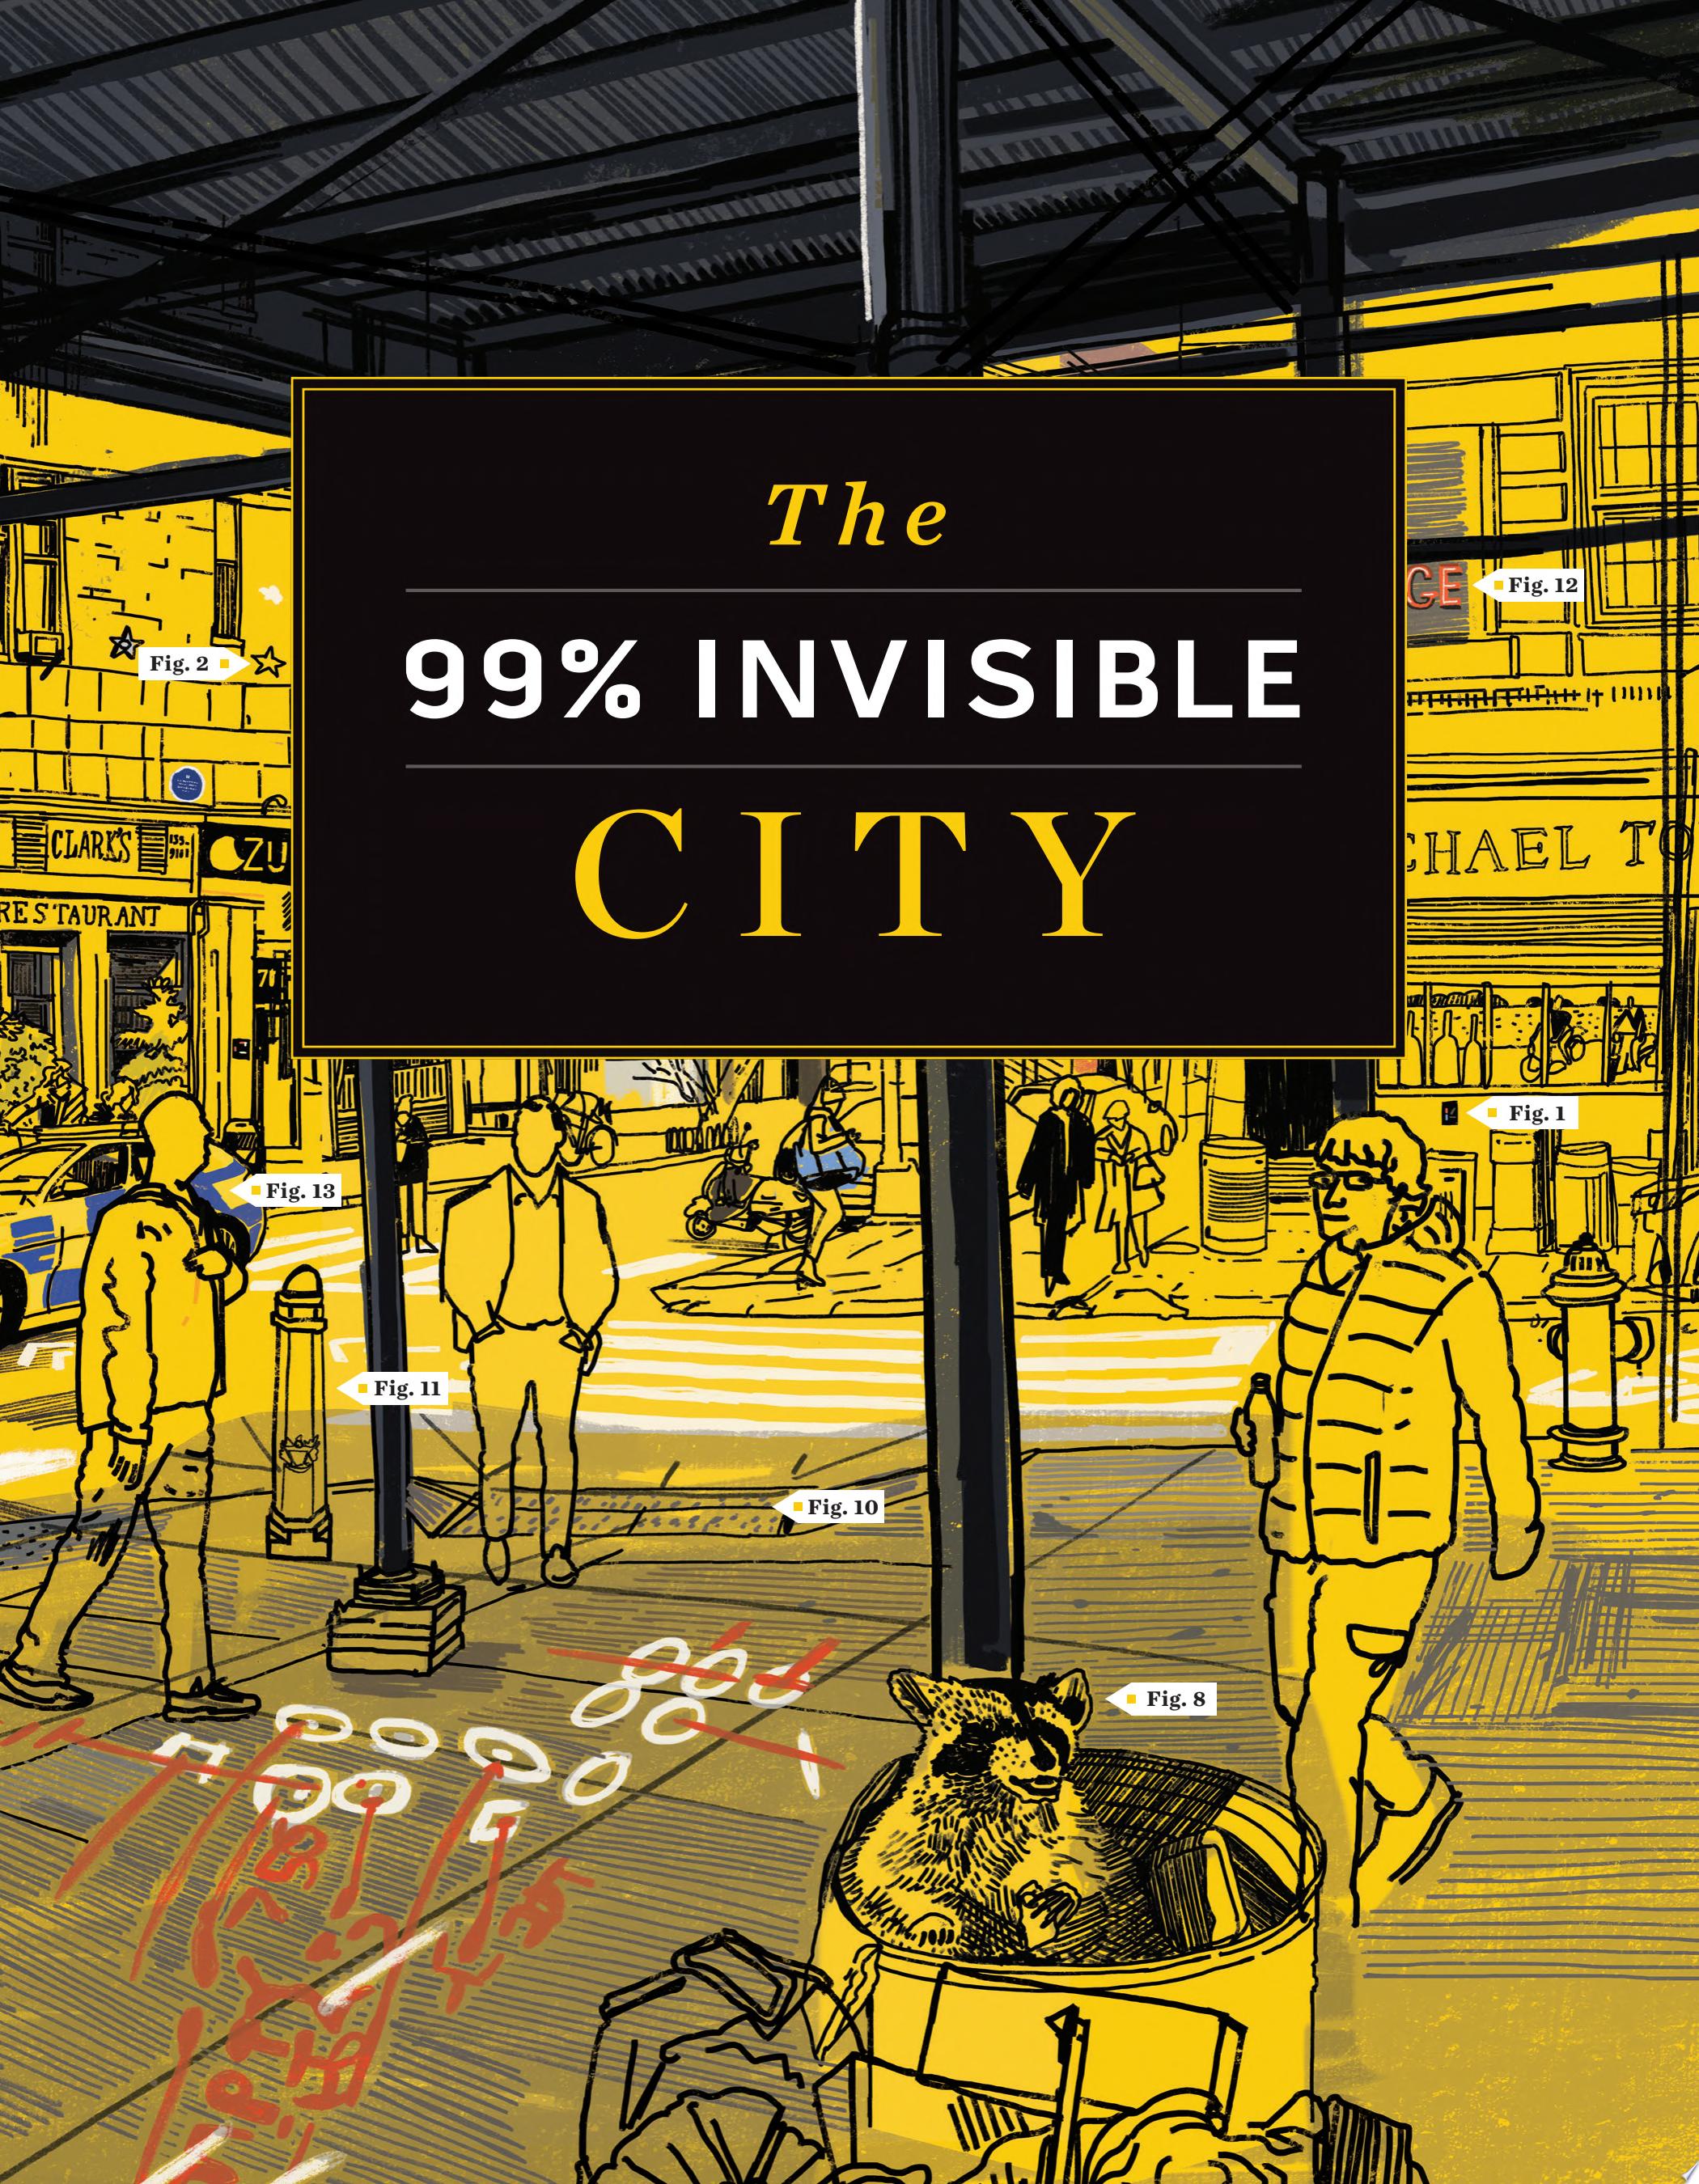 Image for "The 99% Invisible City"